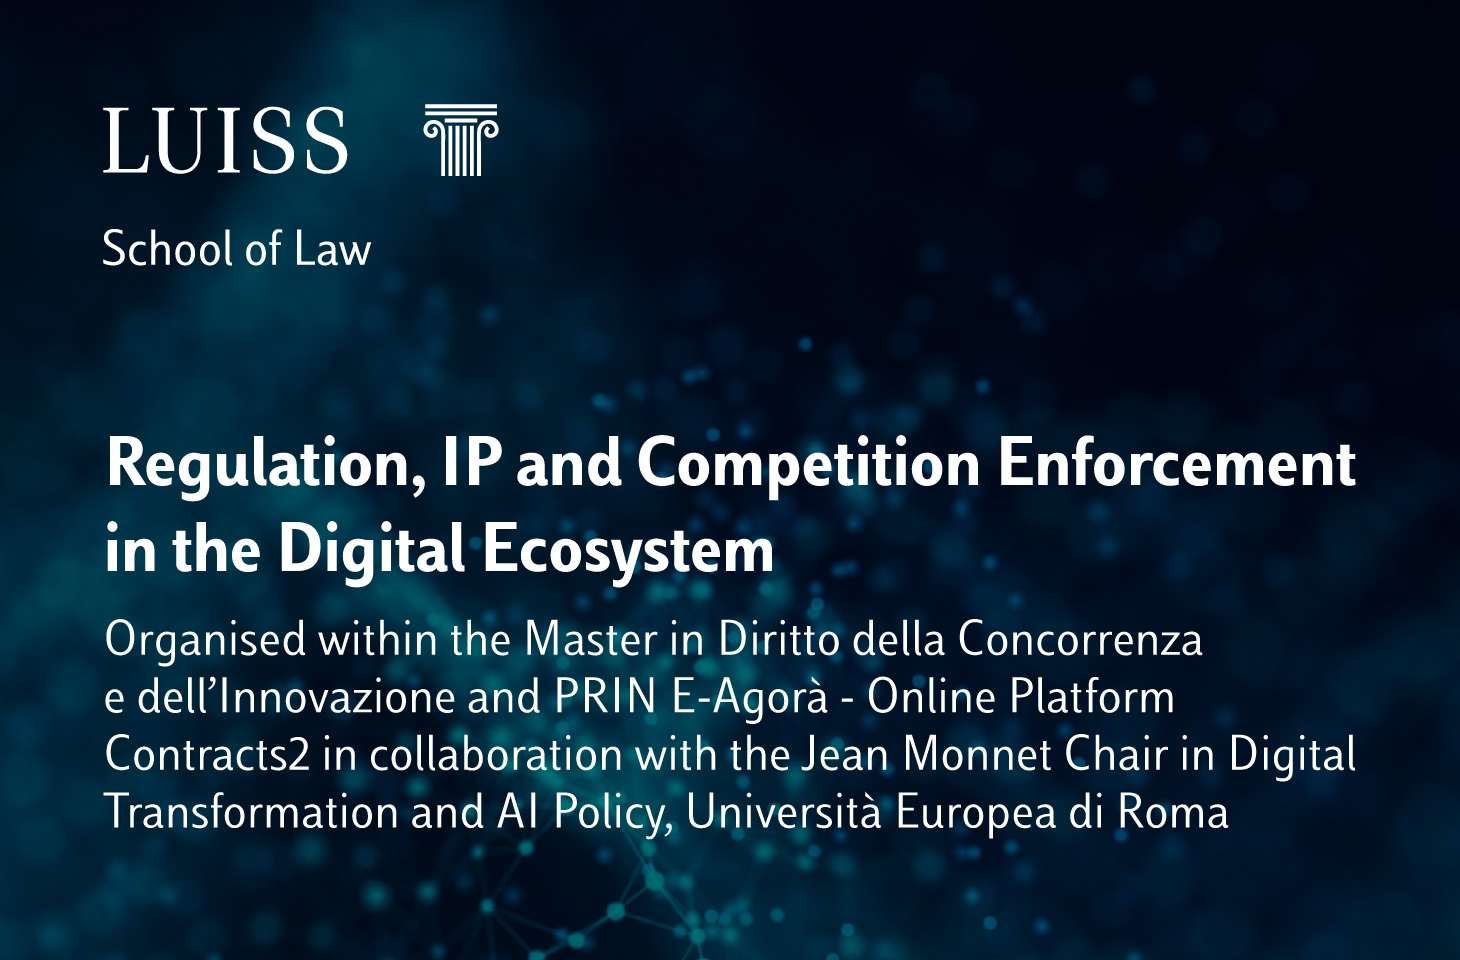 Regulation, IP and Competition Enforcement in the Digital Ecosystem